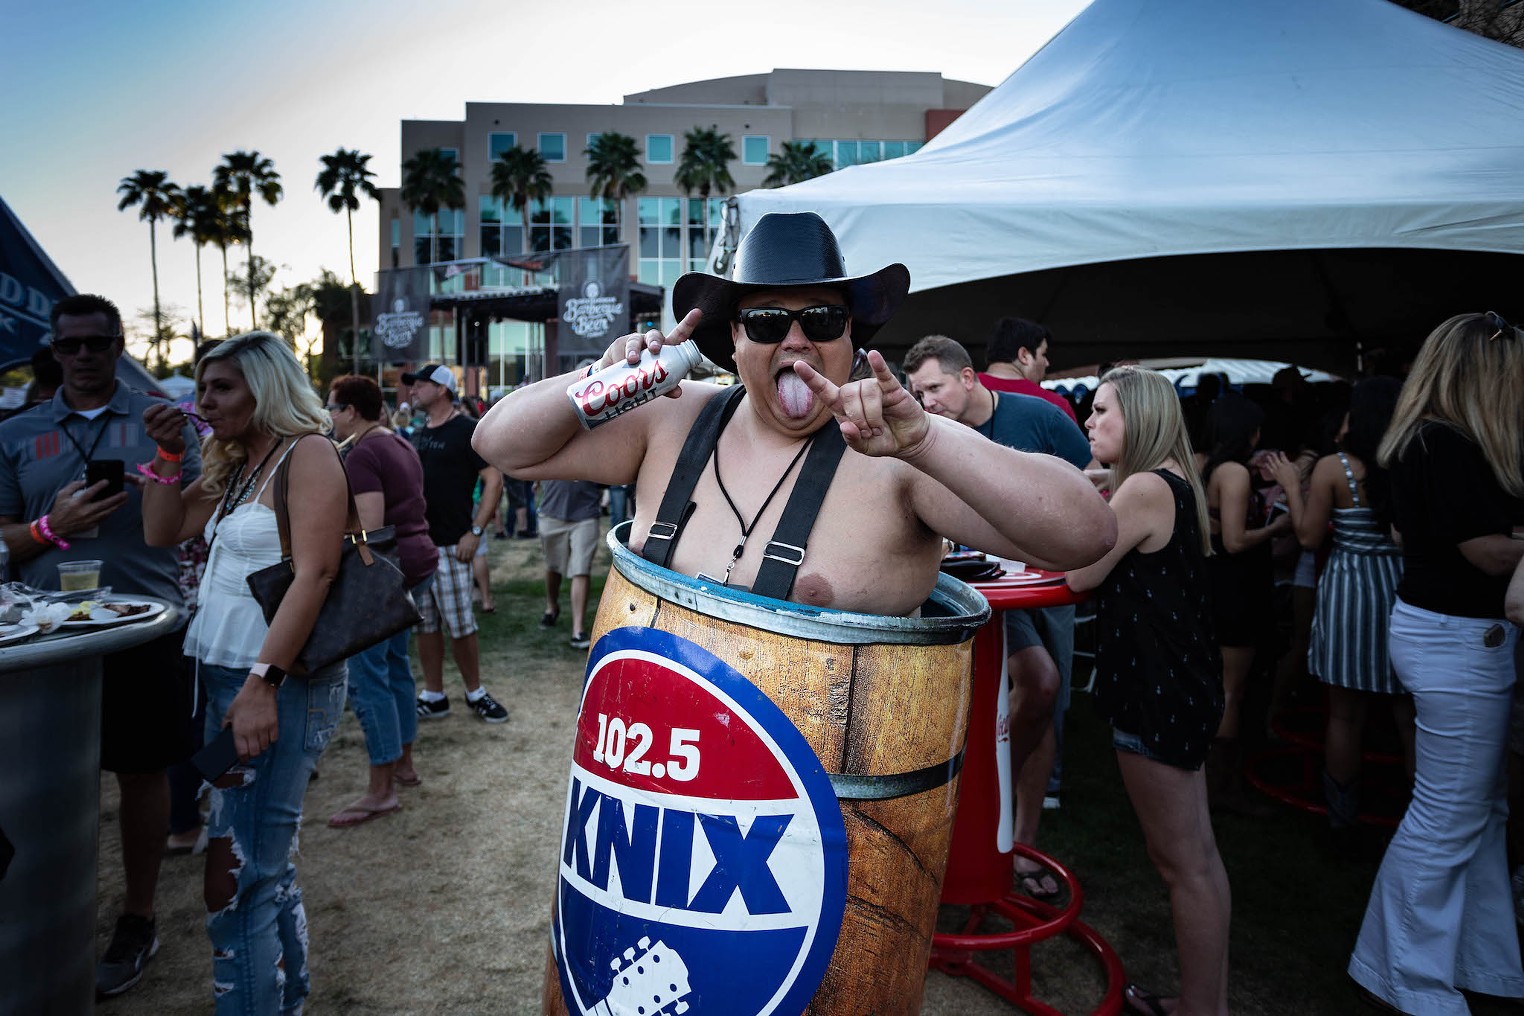 KNIX BBQ & Beer Festival Returns On Saturday, March 26th 2022